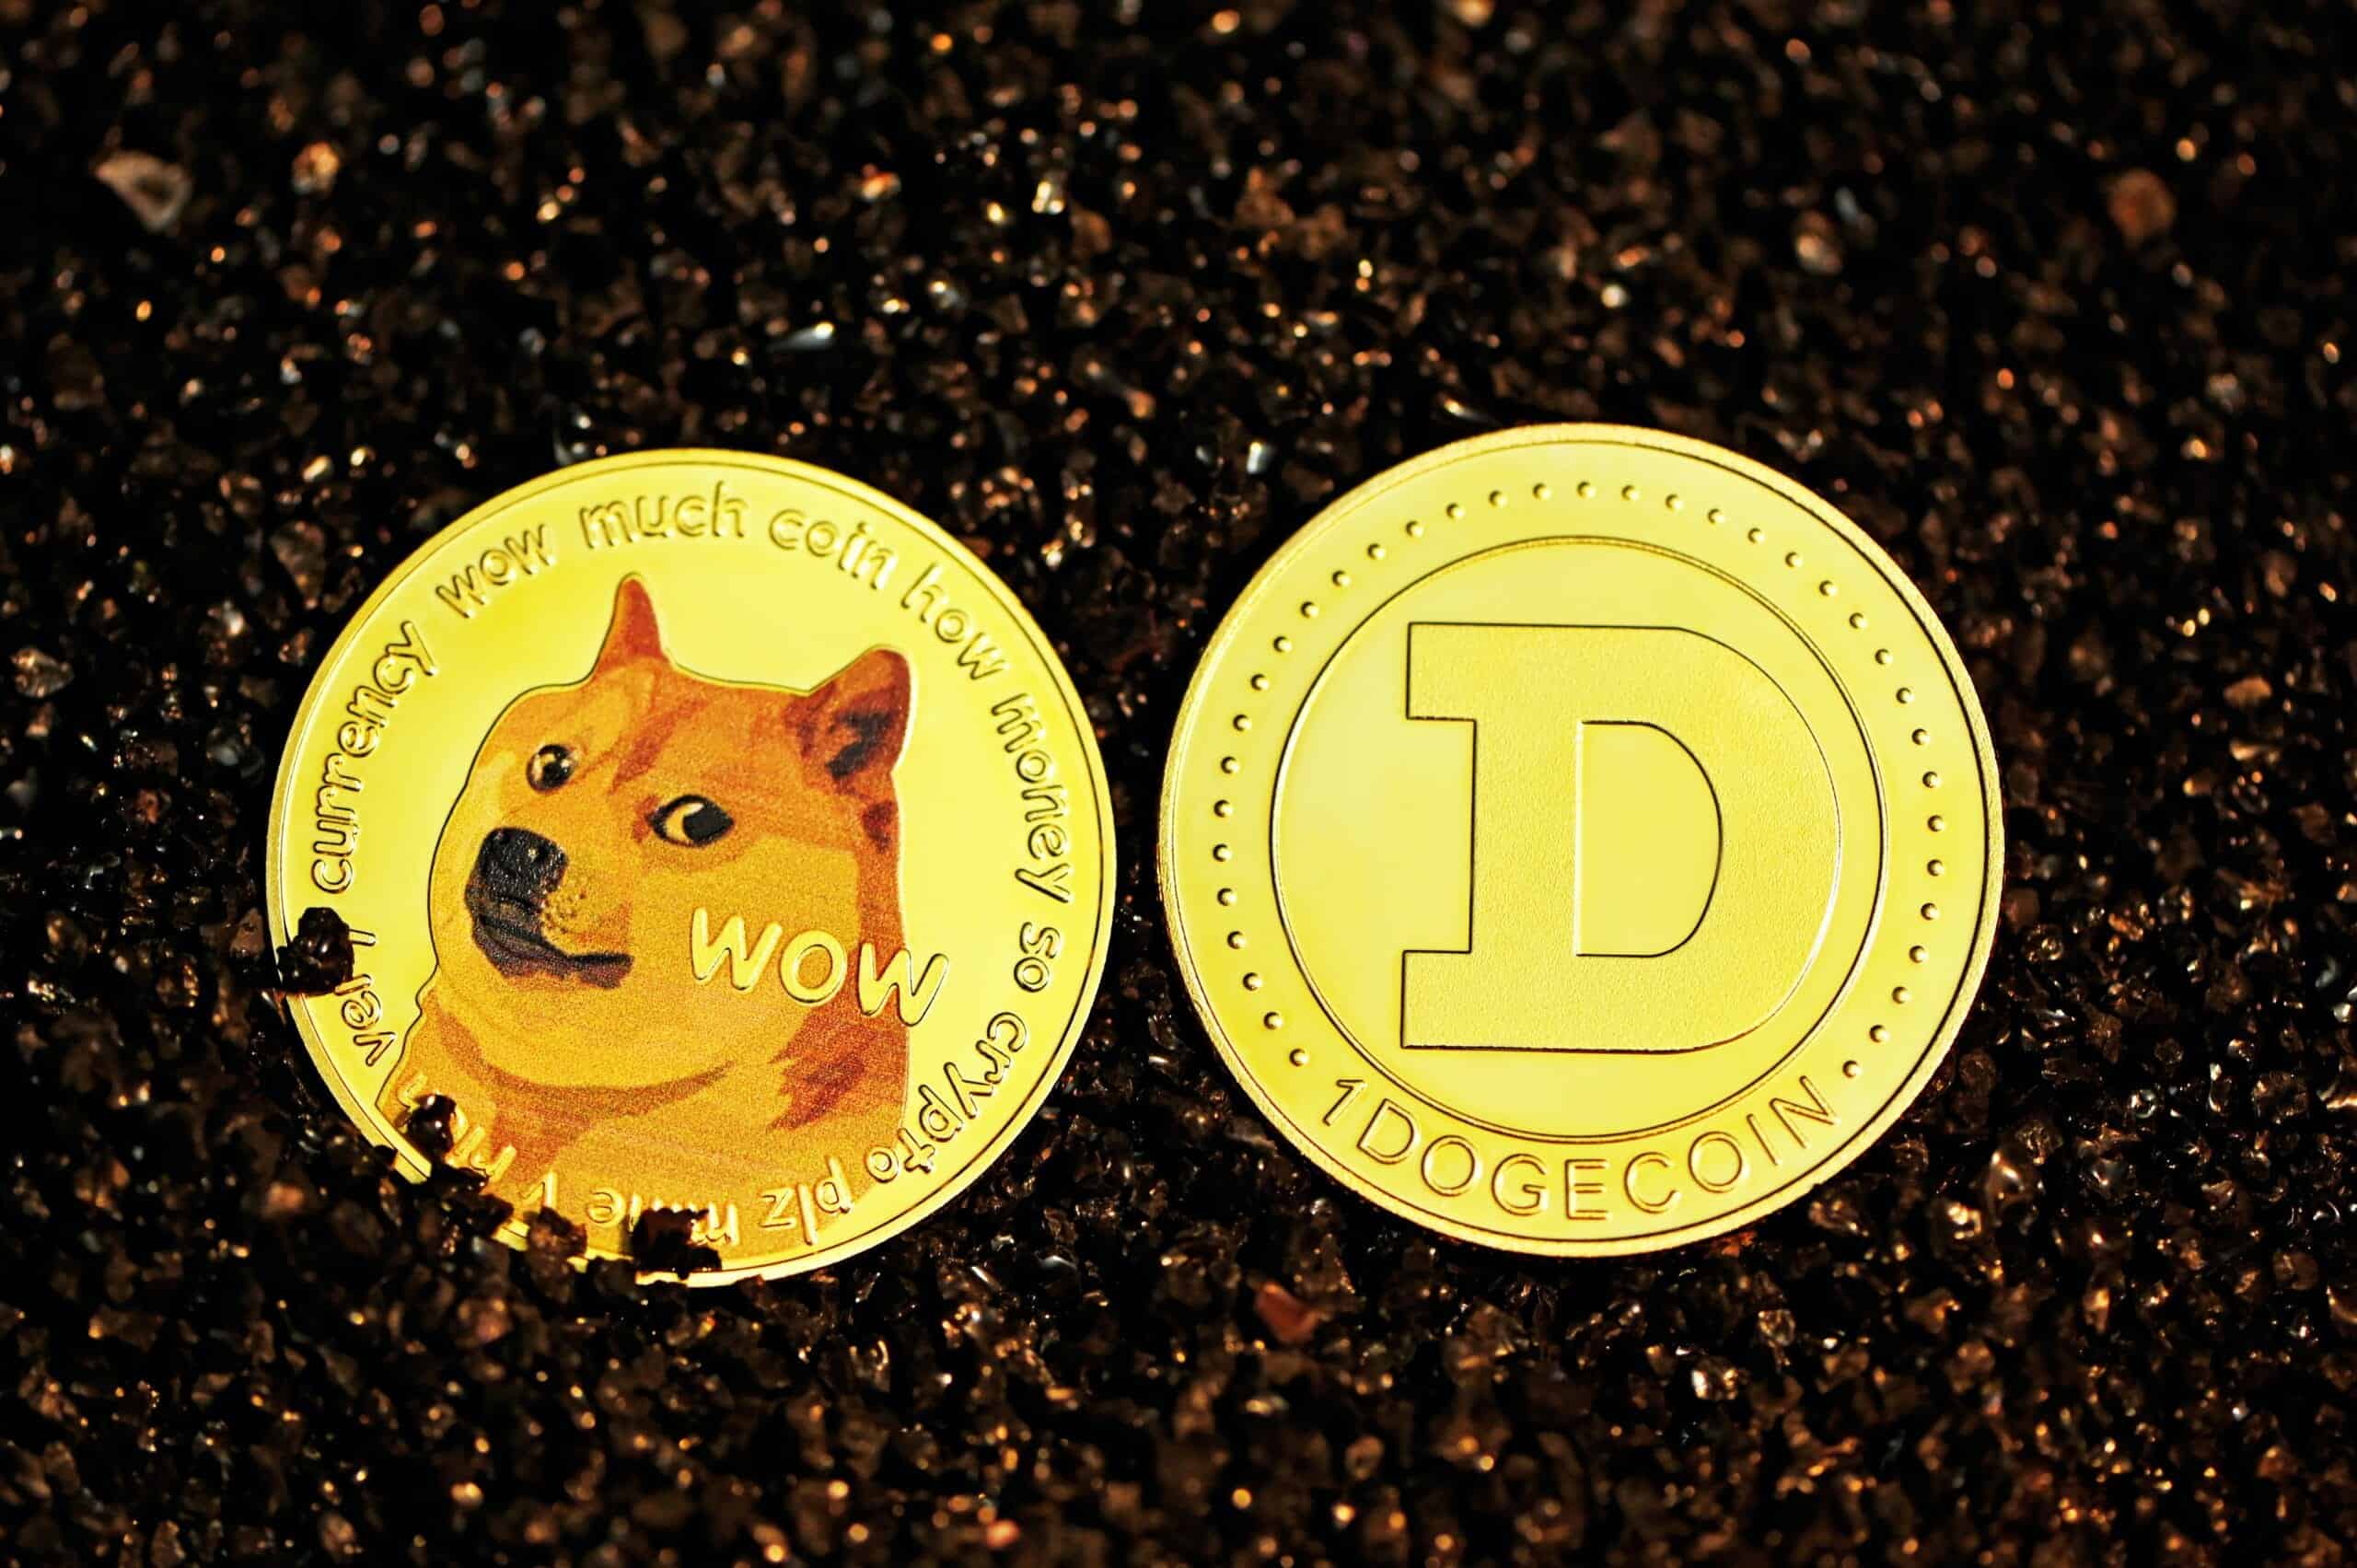 Dogecoin Earns Second Largest Proof-of-Work Crypto Title as Merge Completes